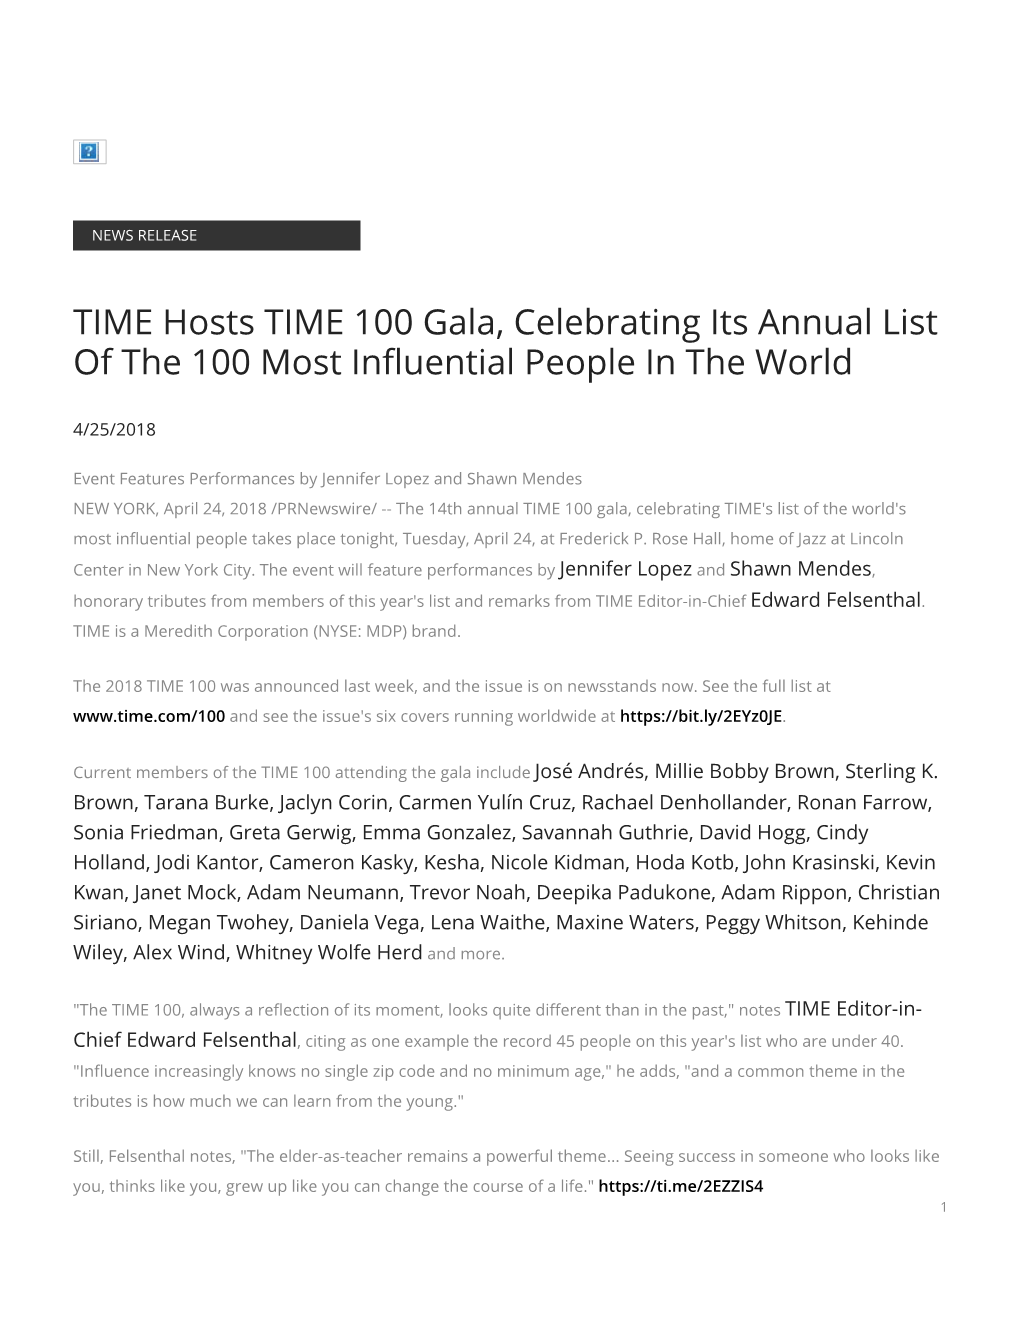 TIME Hosts TIME 100 Gala, Celebrating Its Annual List of the 100 Most Influential People in the World